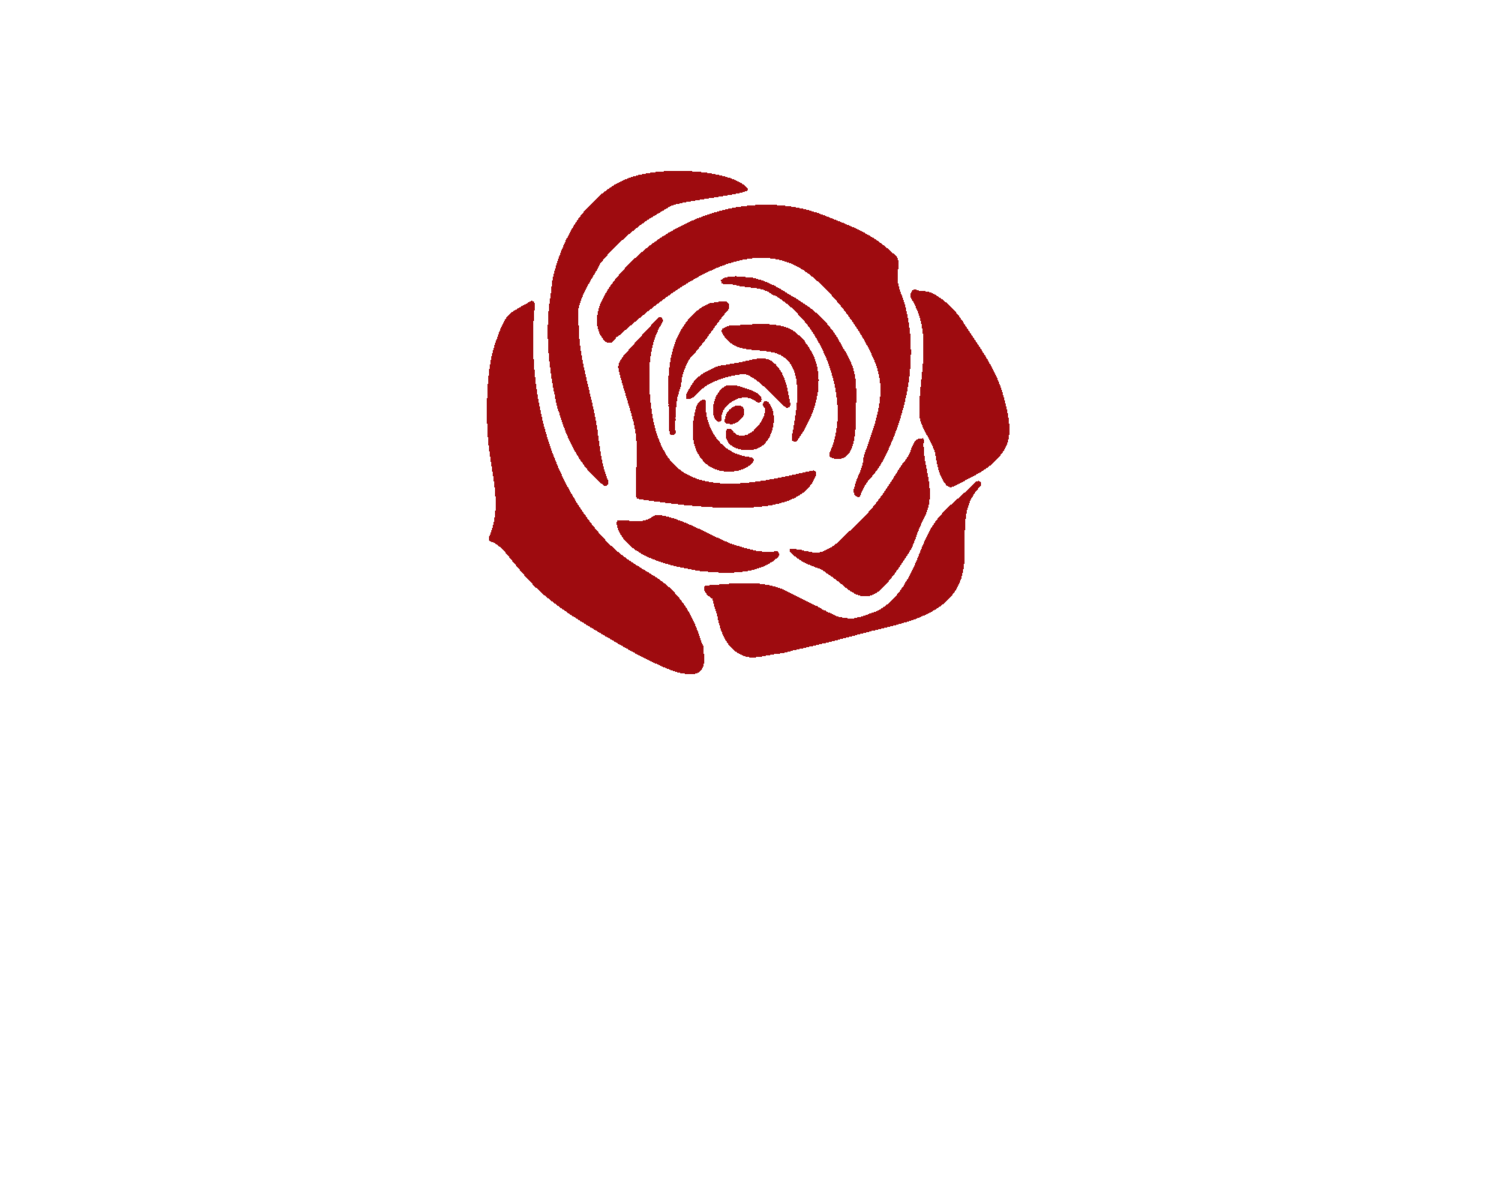 Labour Rose , HD Wallpaper & Backgrounds